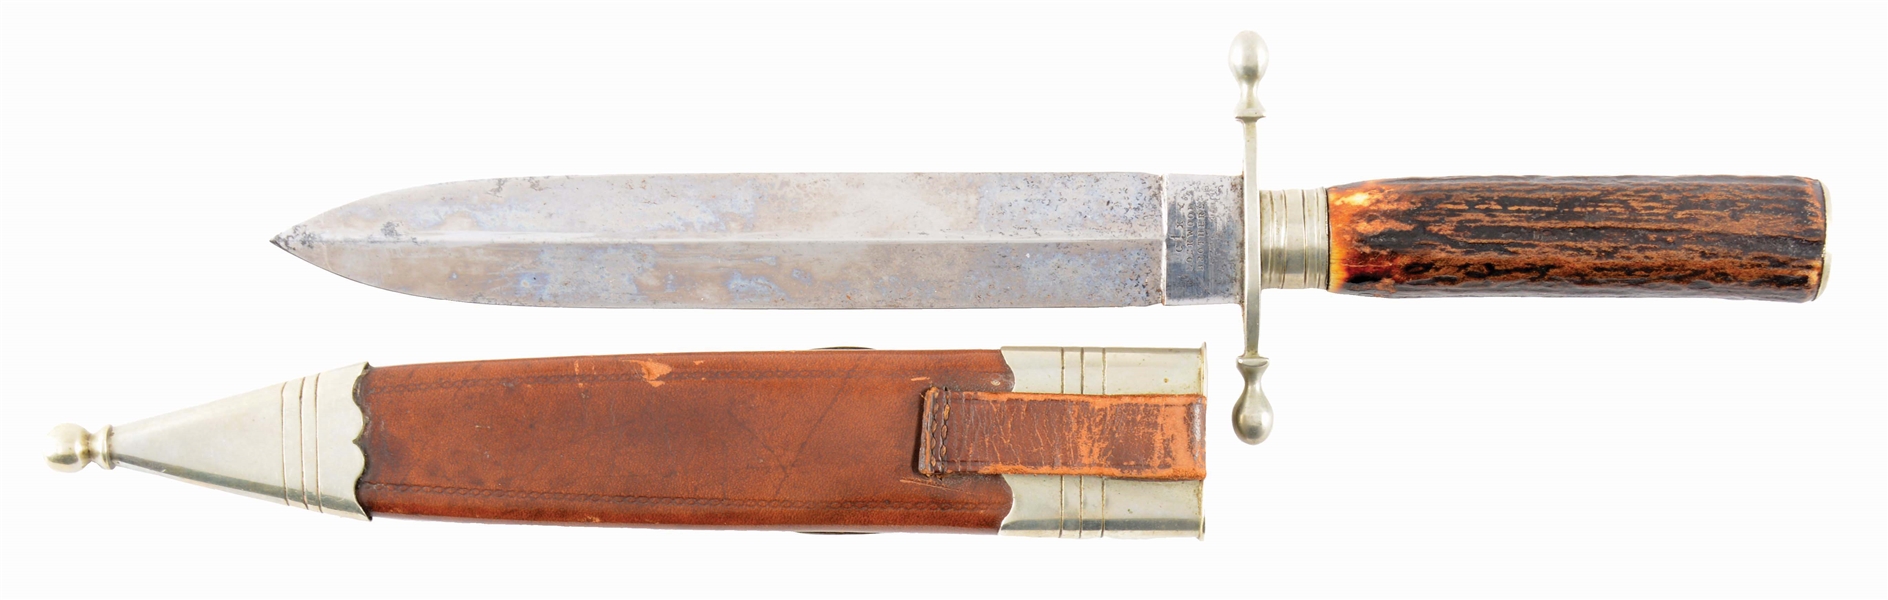 A FINE ENGLISH PRESENTATION SPEARPOINT BOWIE KNIFE PRESENTED TO JOHN HOOD 1880.